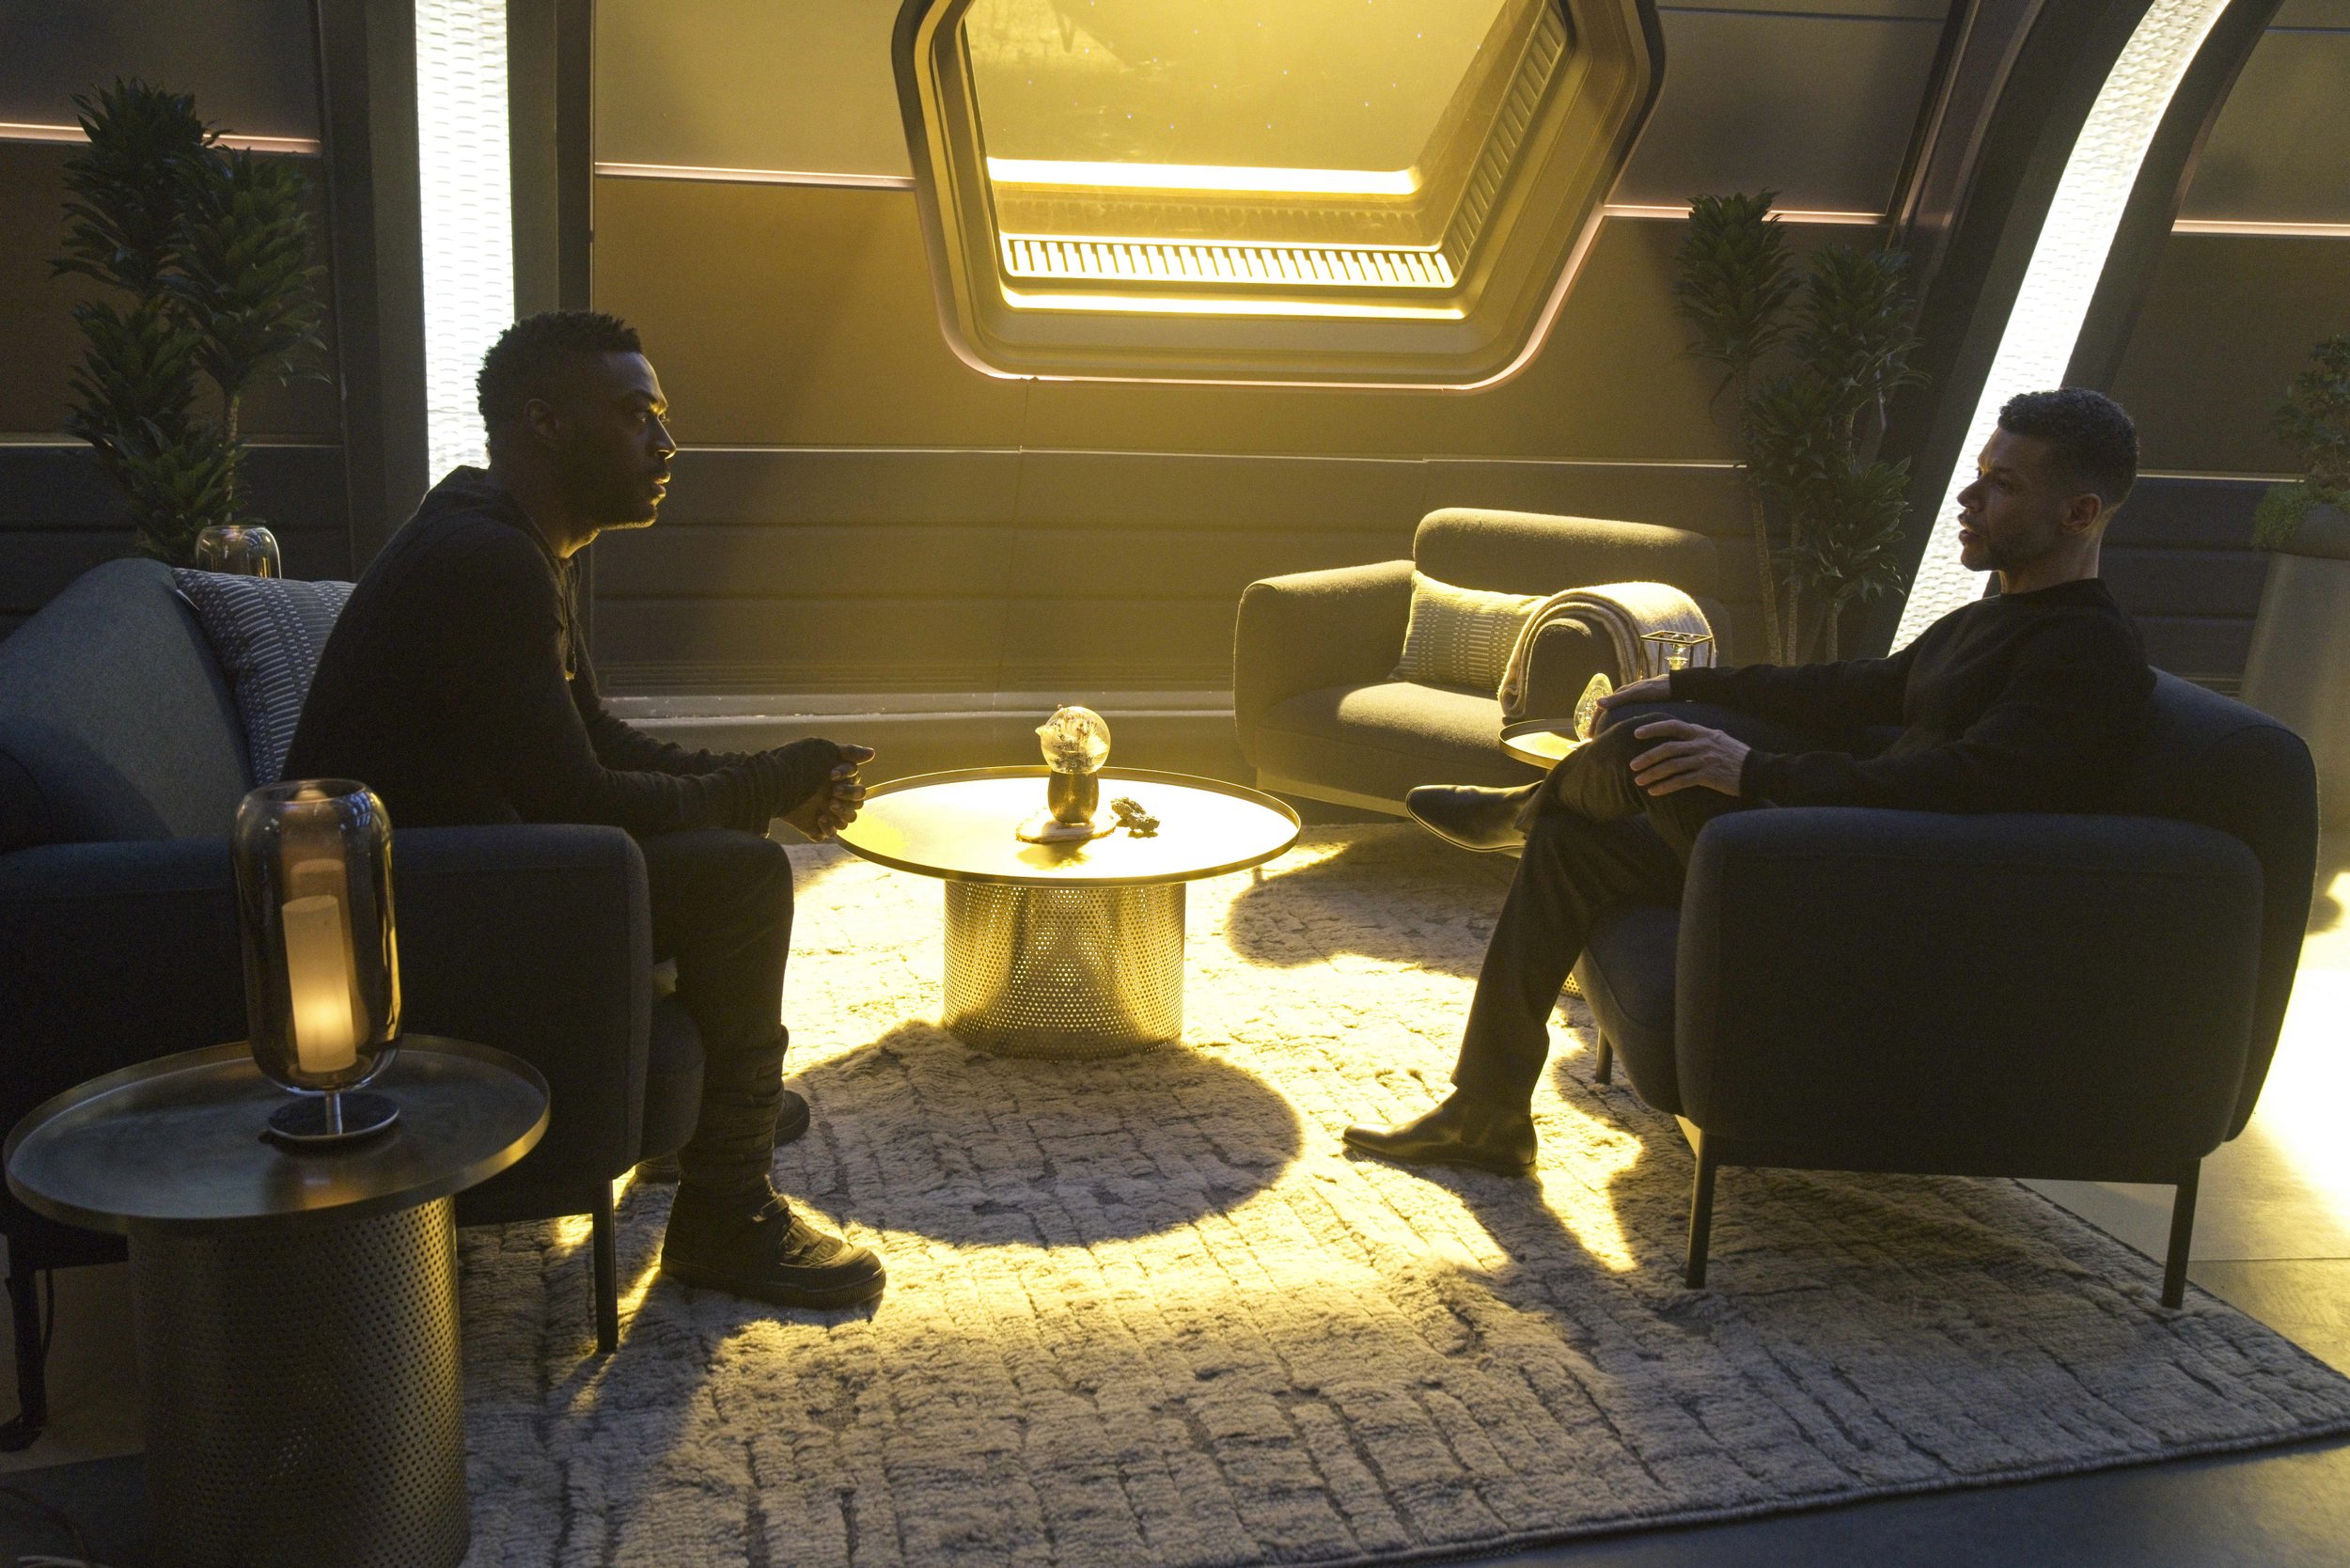   Pictured: David Ajala as Book and Wilson Cruz as Culber of the Paramount+ original series STAR TREK: DISCOVERY. Photo Cr: Michael Gibson/Paramount+ © 2021 CBS Interactive. All Rights Reserved.  